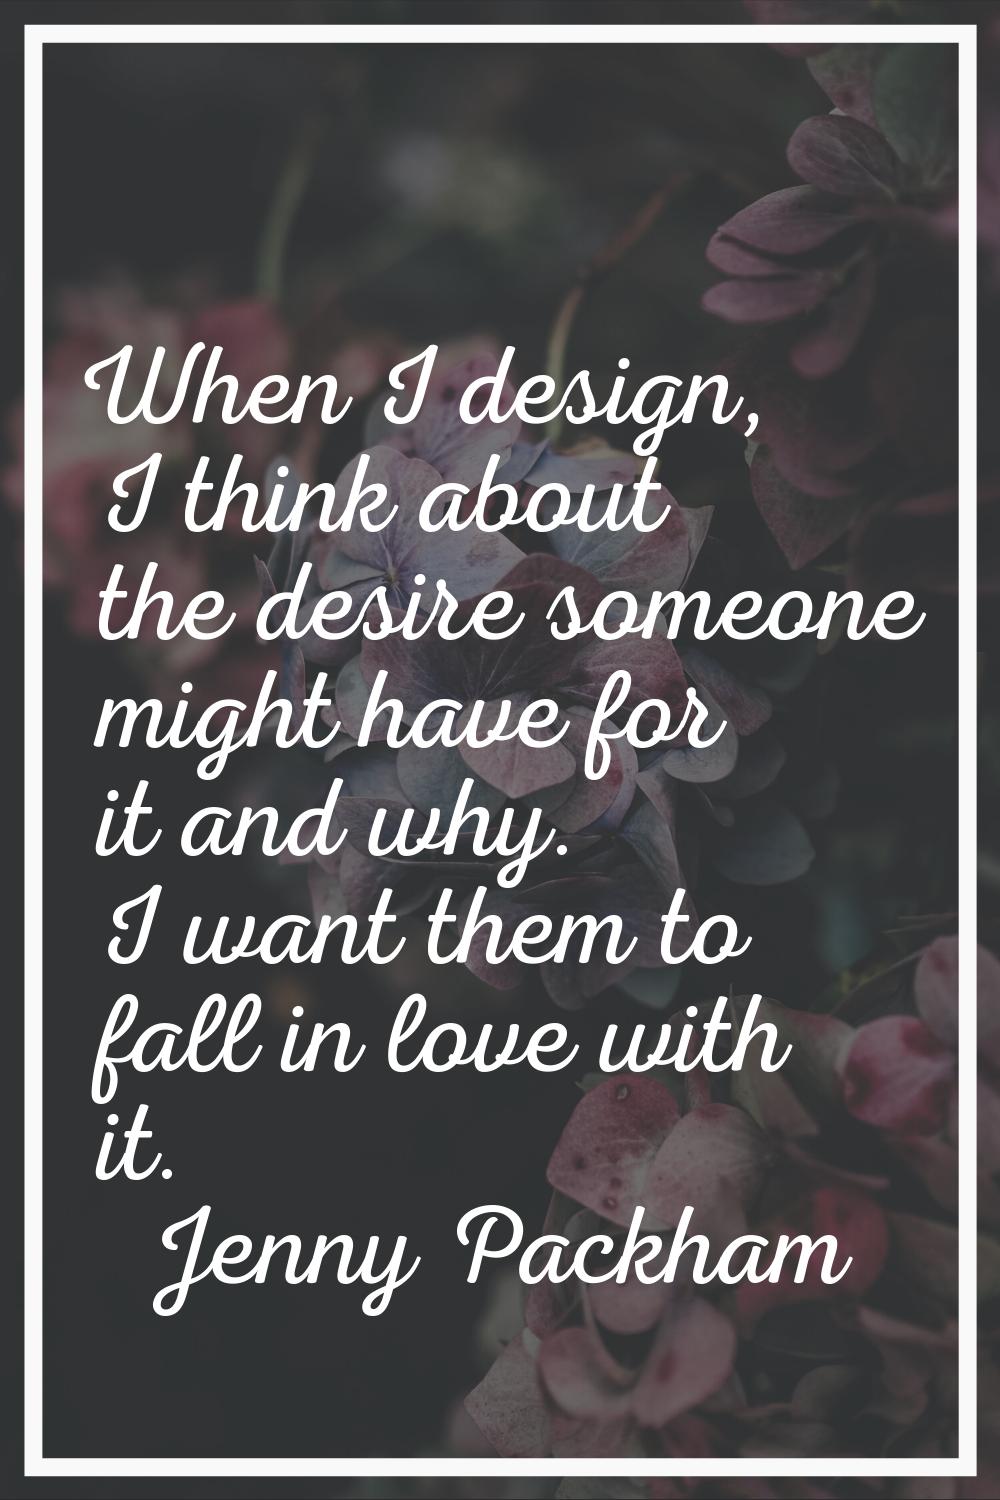 When I design, I think about the desire someone might have for it and why. I want them to fall in l